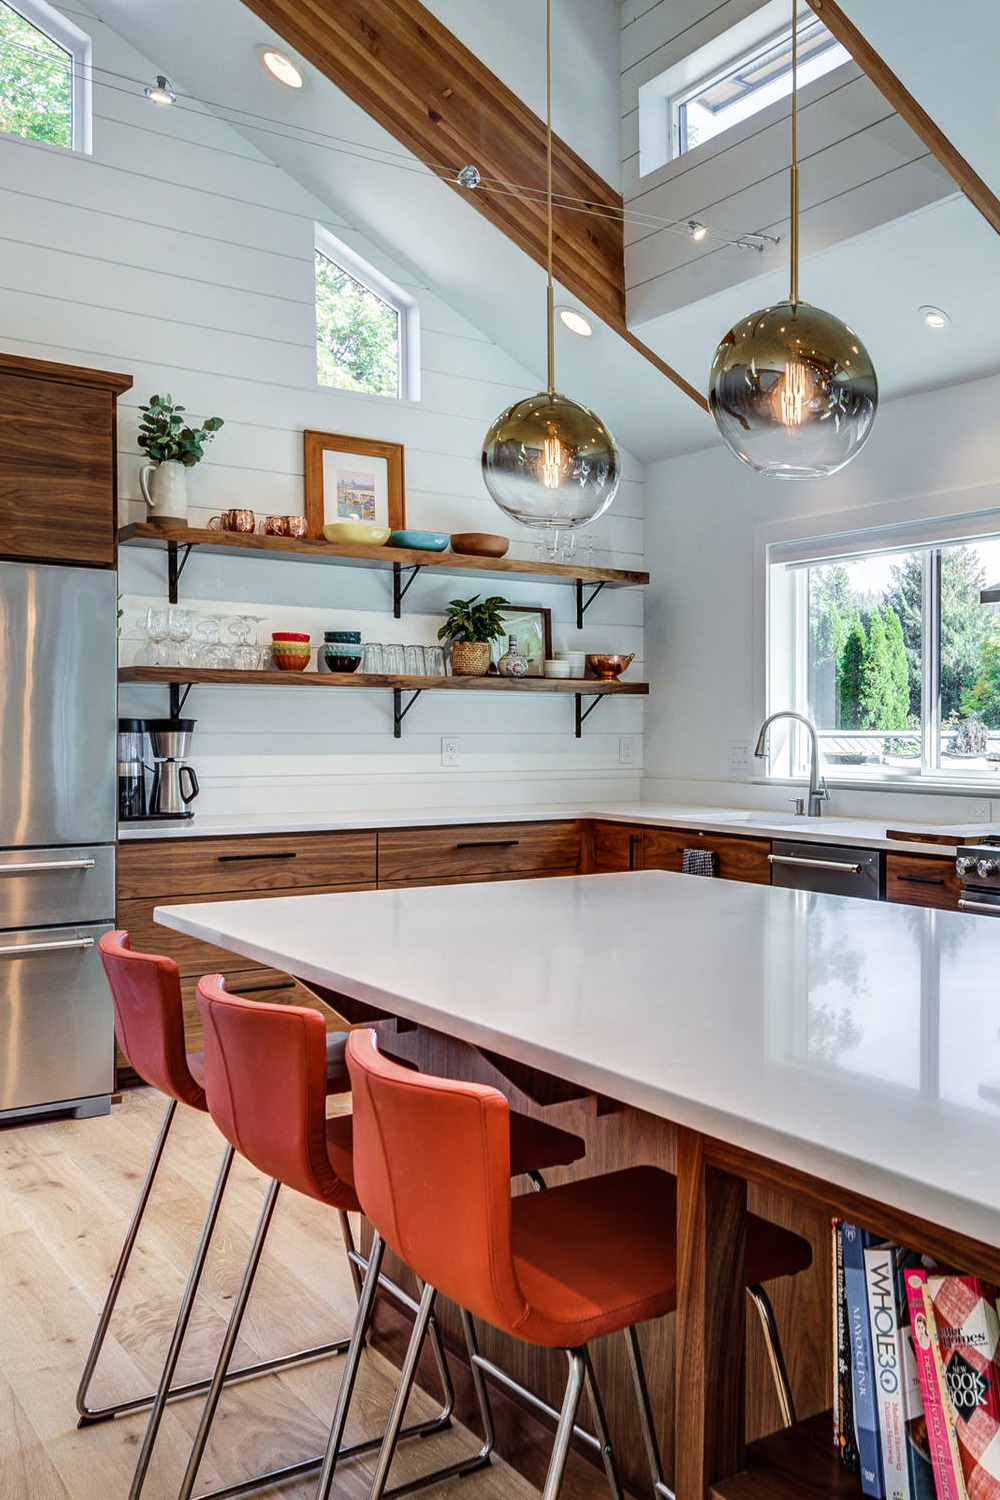 White Countertops Kitchen With Shiplap Backsplash Wood Floor Wall Board Brown Painted Cabinetry Planks Rustic Mounted